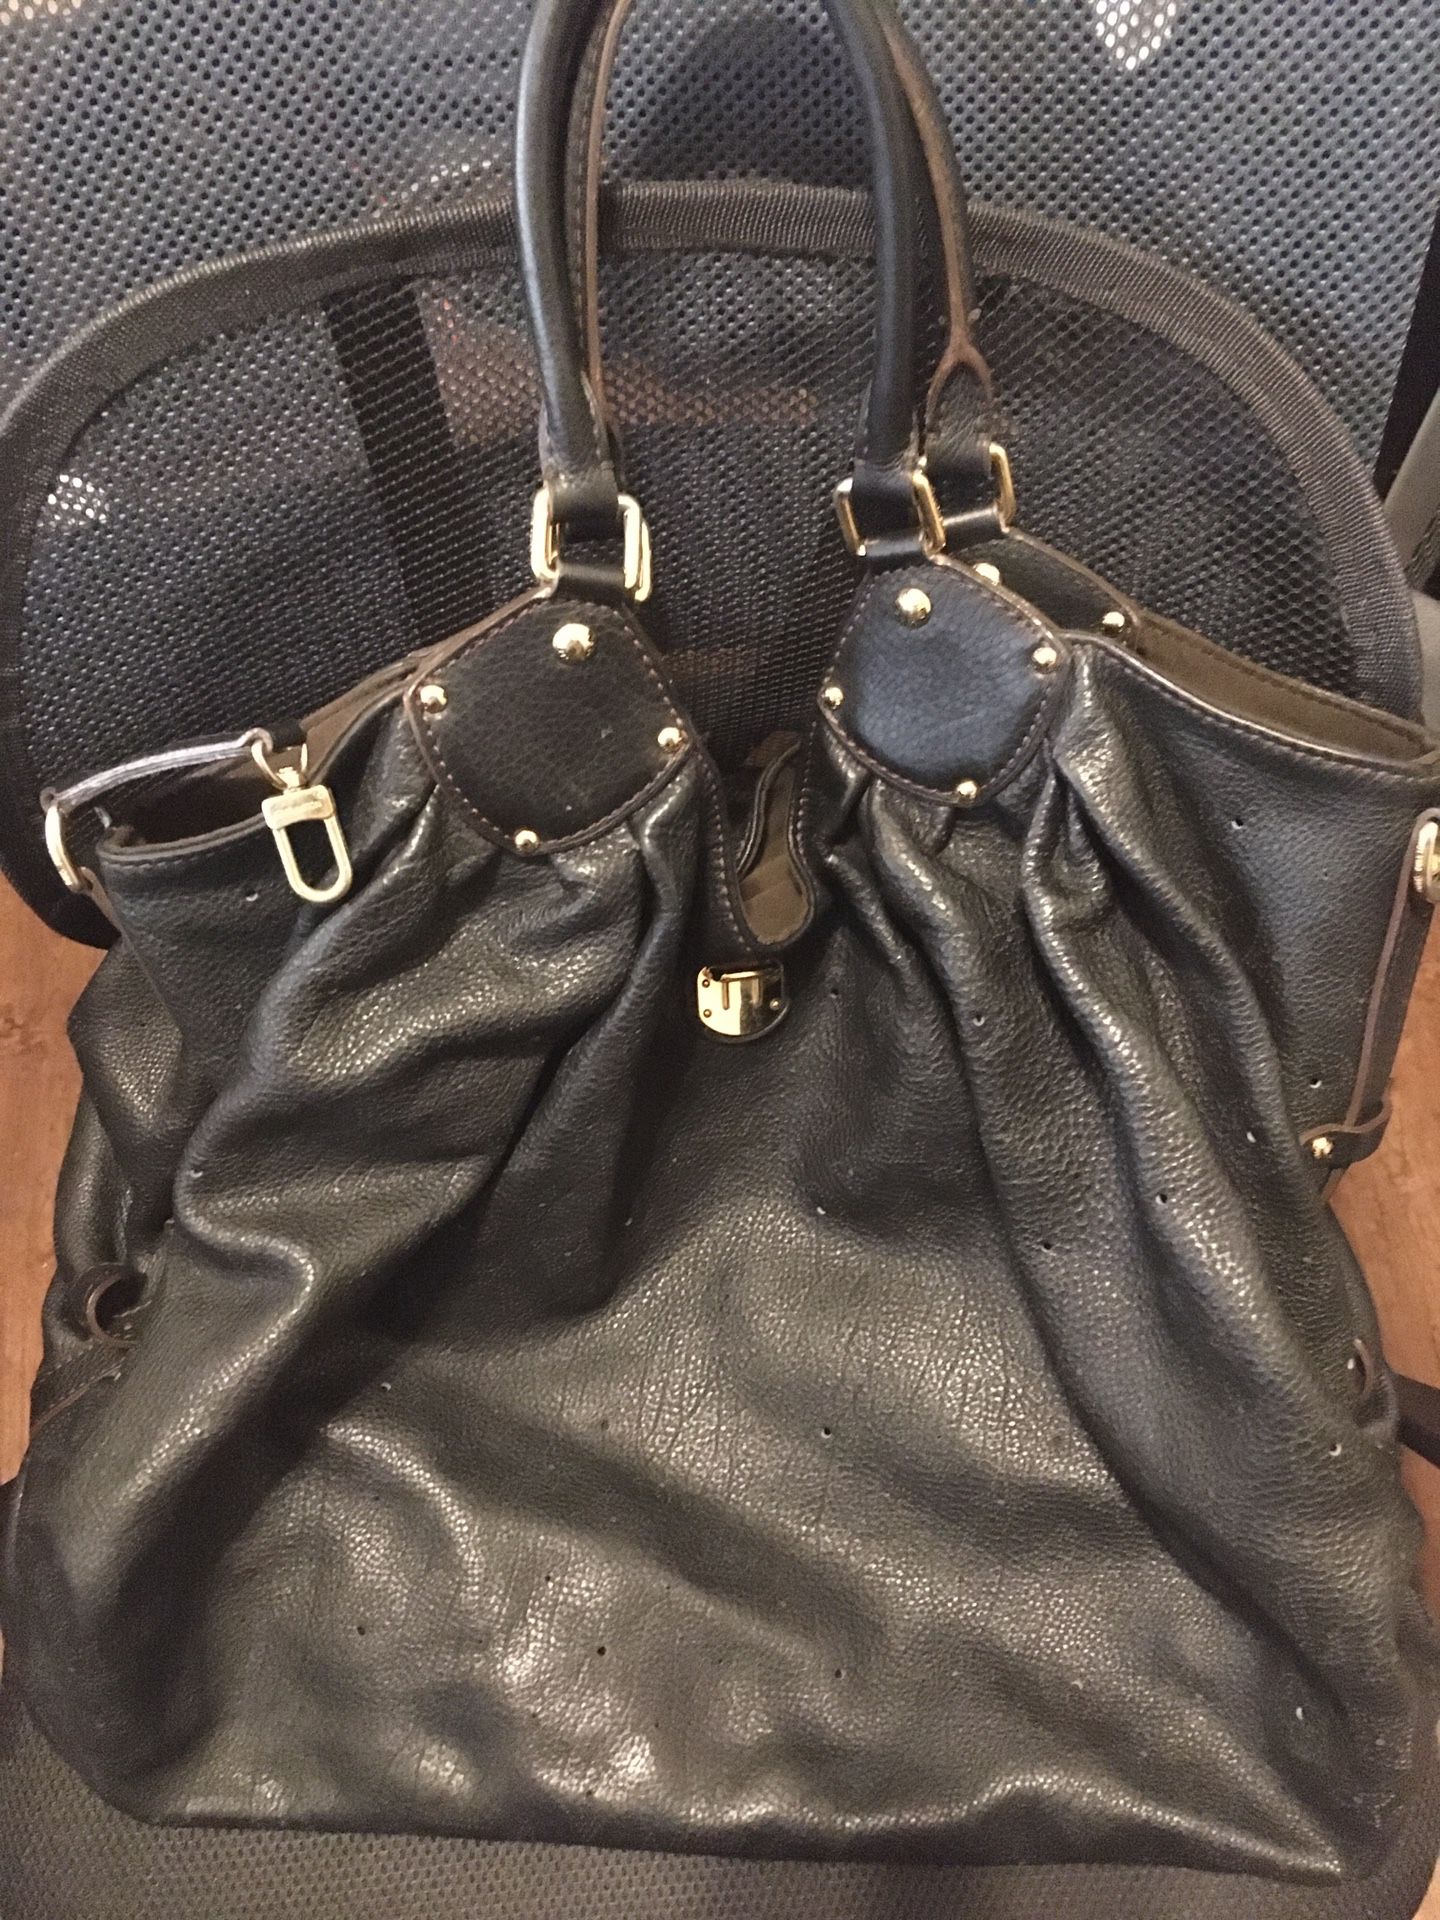 VALENTINES DAY SALE - Authentic Louis Vuitton Mahina XL Hobo Purse $1900  ObO